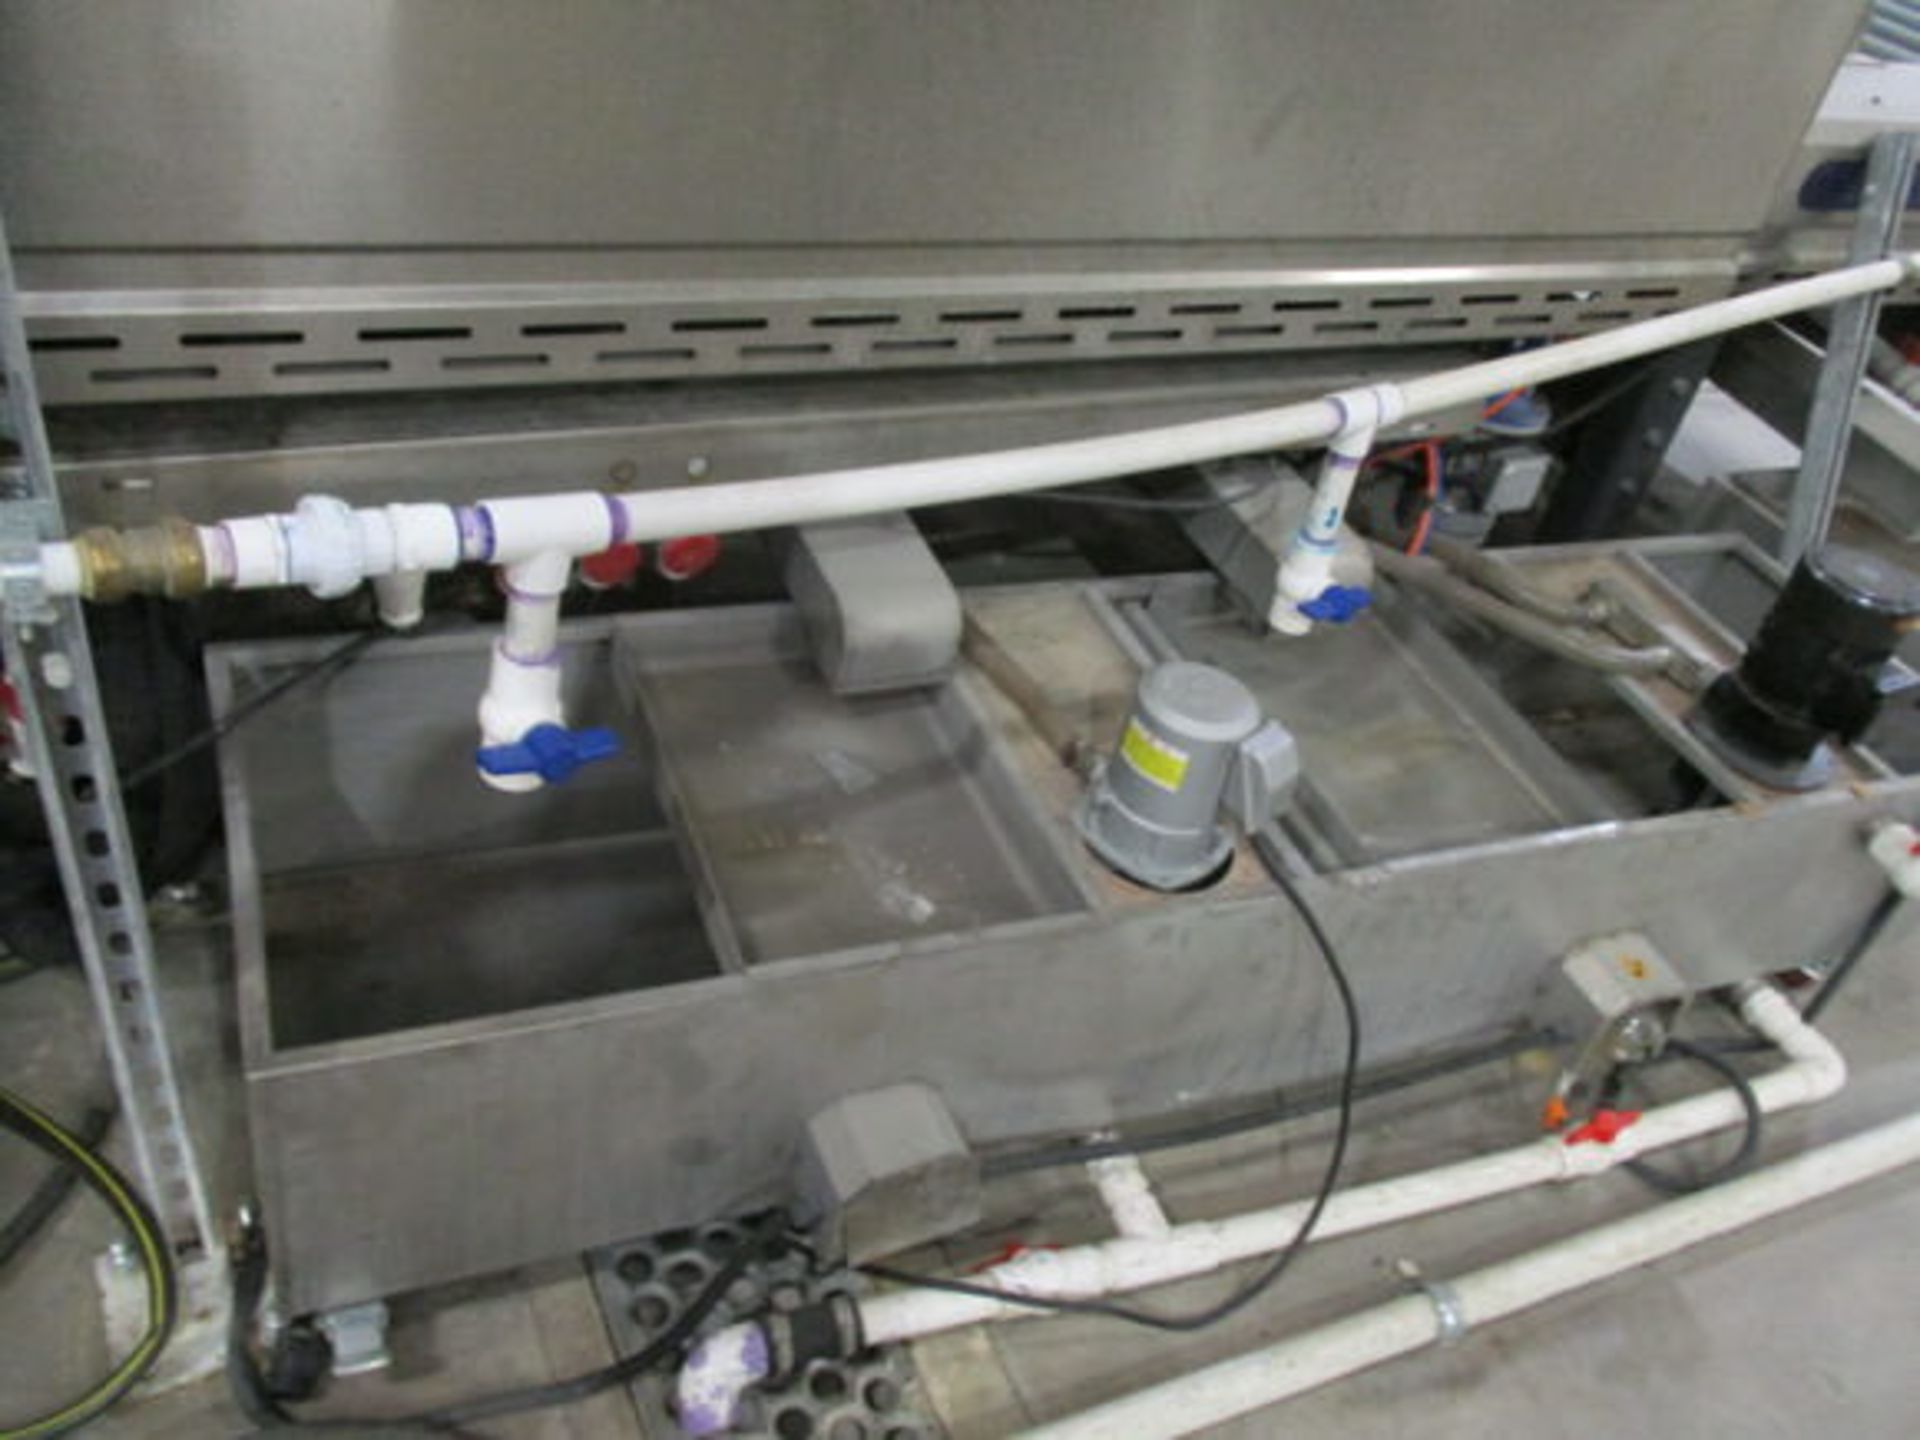 2023 WINTEC WTO/2500 GLASS WASHER, 96" CAP, 480V, SPEED: 0-12 M/MIN, THICKNESS 3-20MM - Image 10 of 13